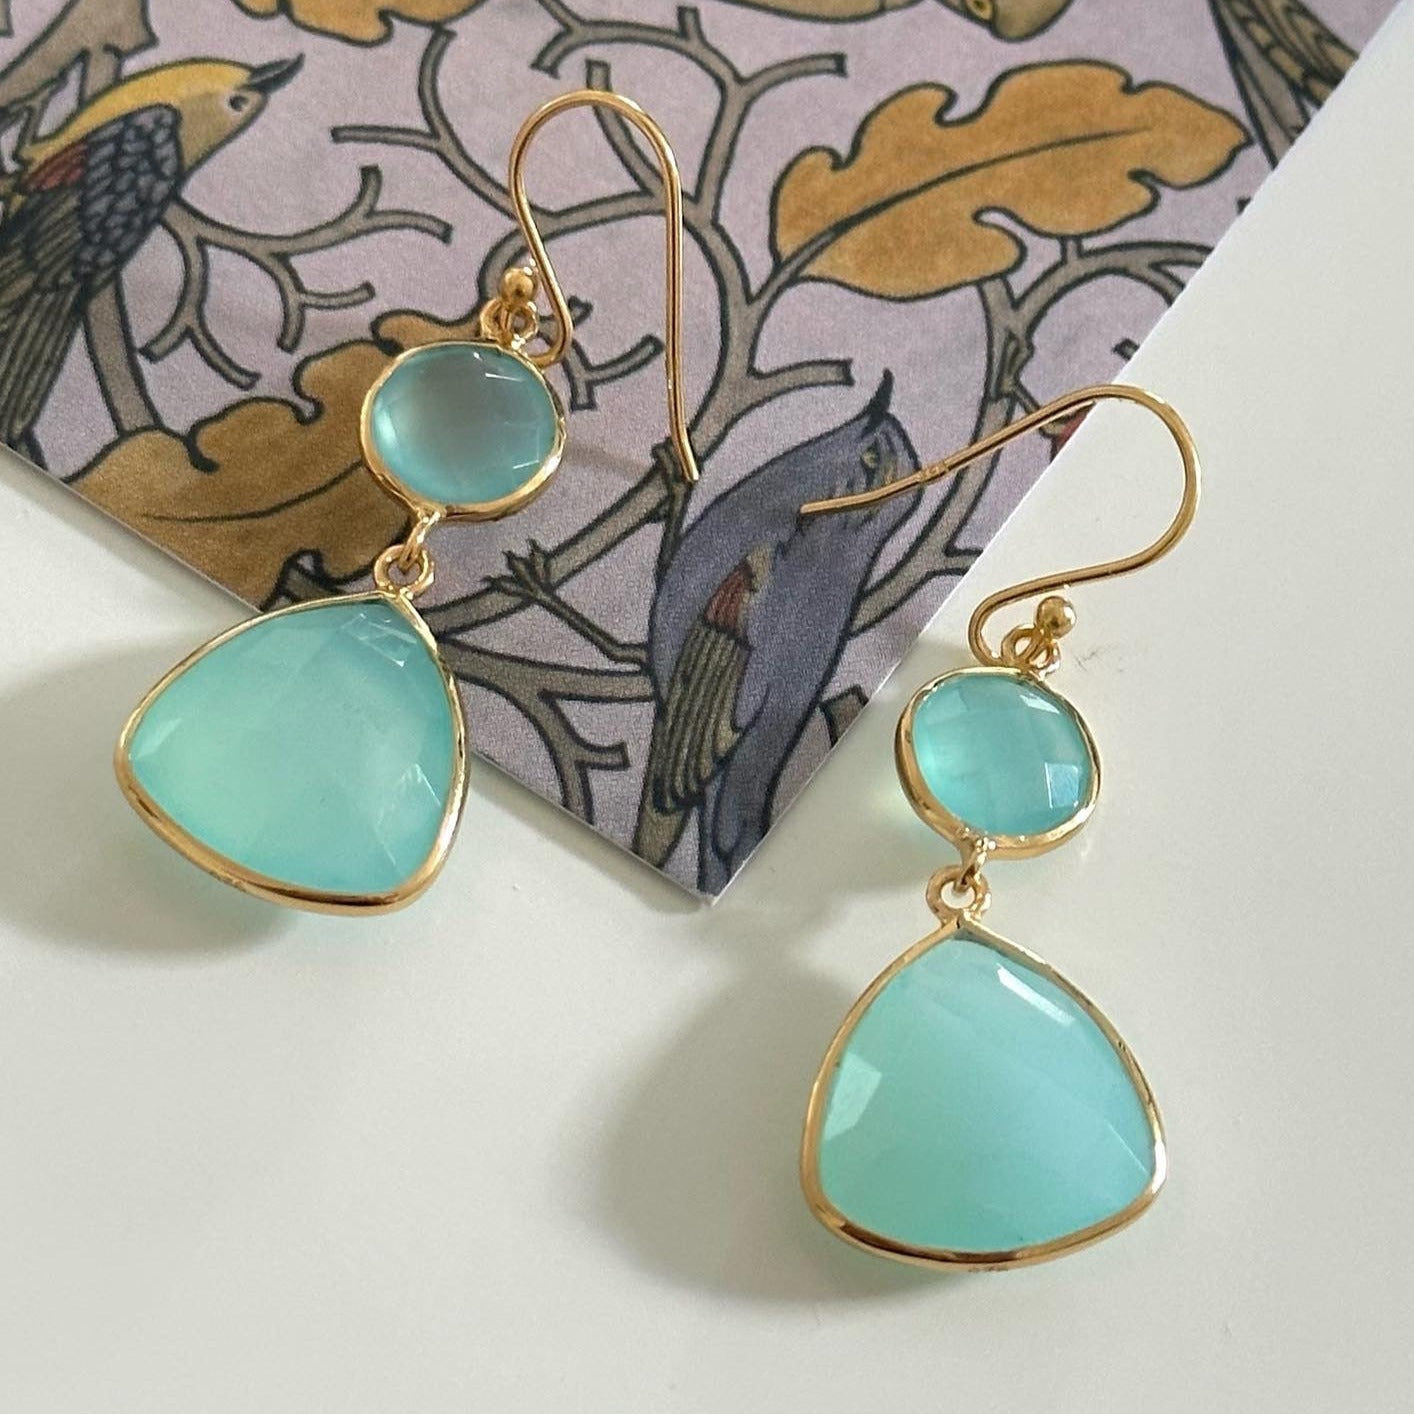 Aqua Chalcedony Gemstone Earrings in Gold Plated Sterling Silver - Triangular